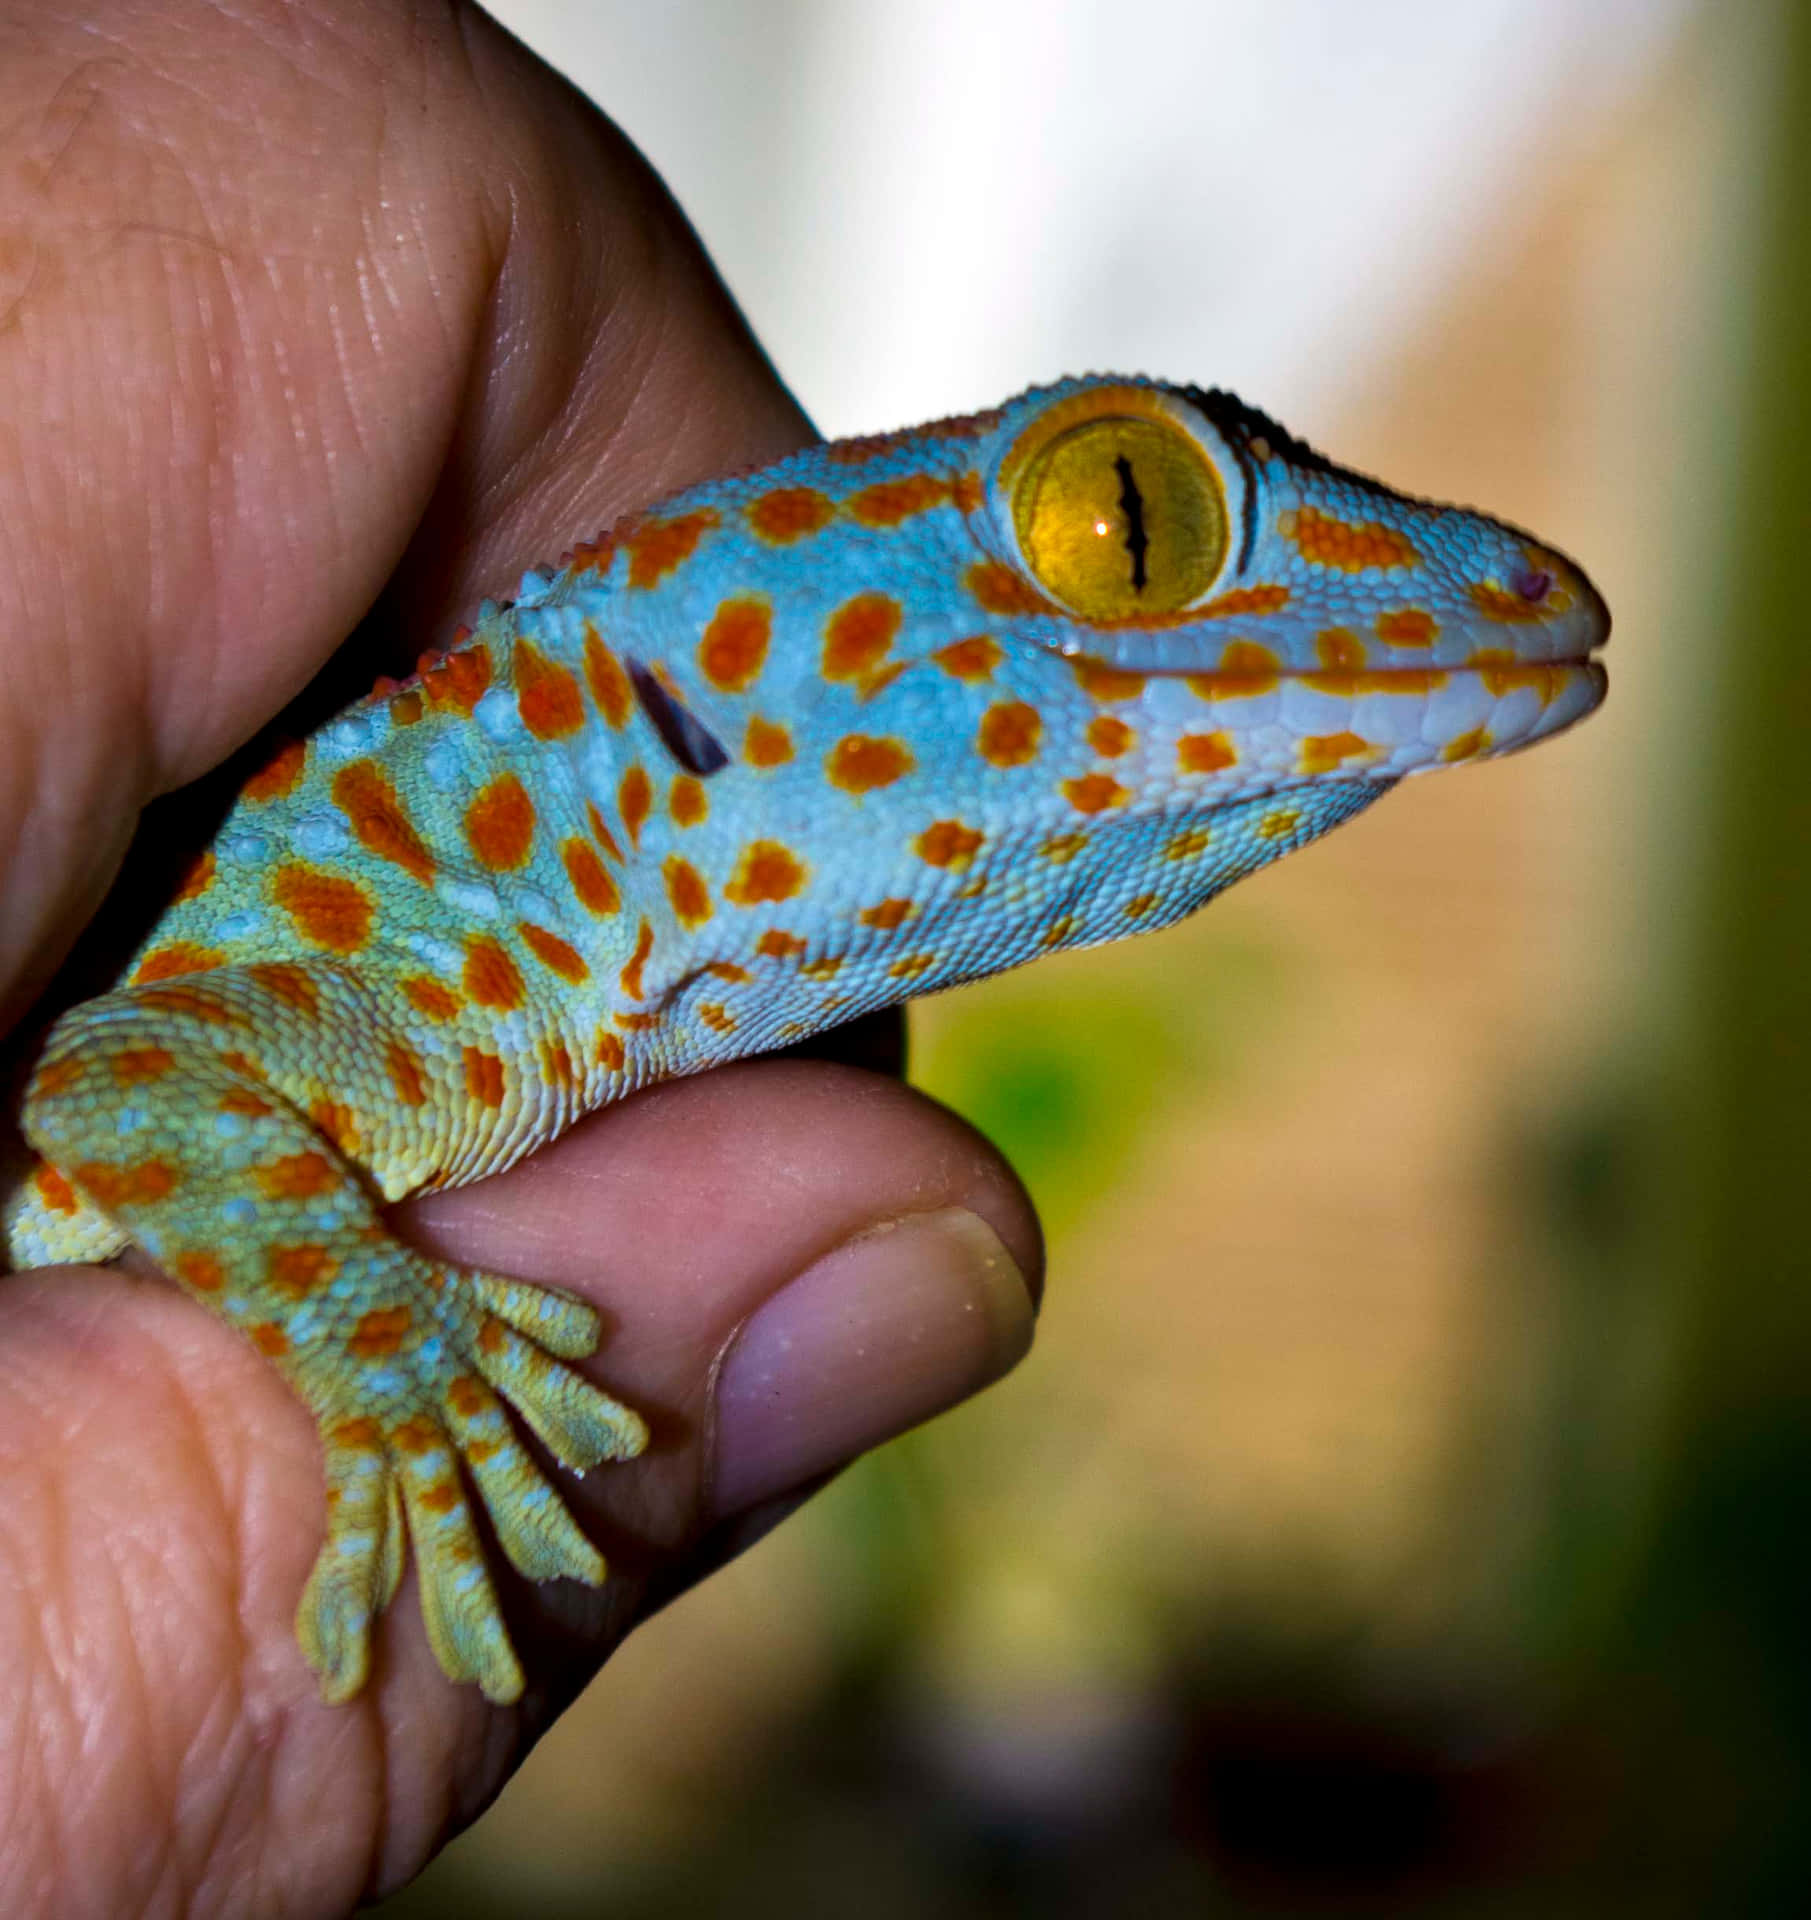 Get a closer look at this stunning red-eyed green gecko!